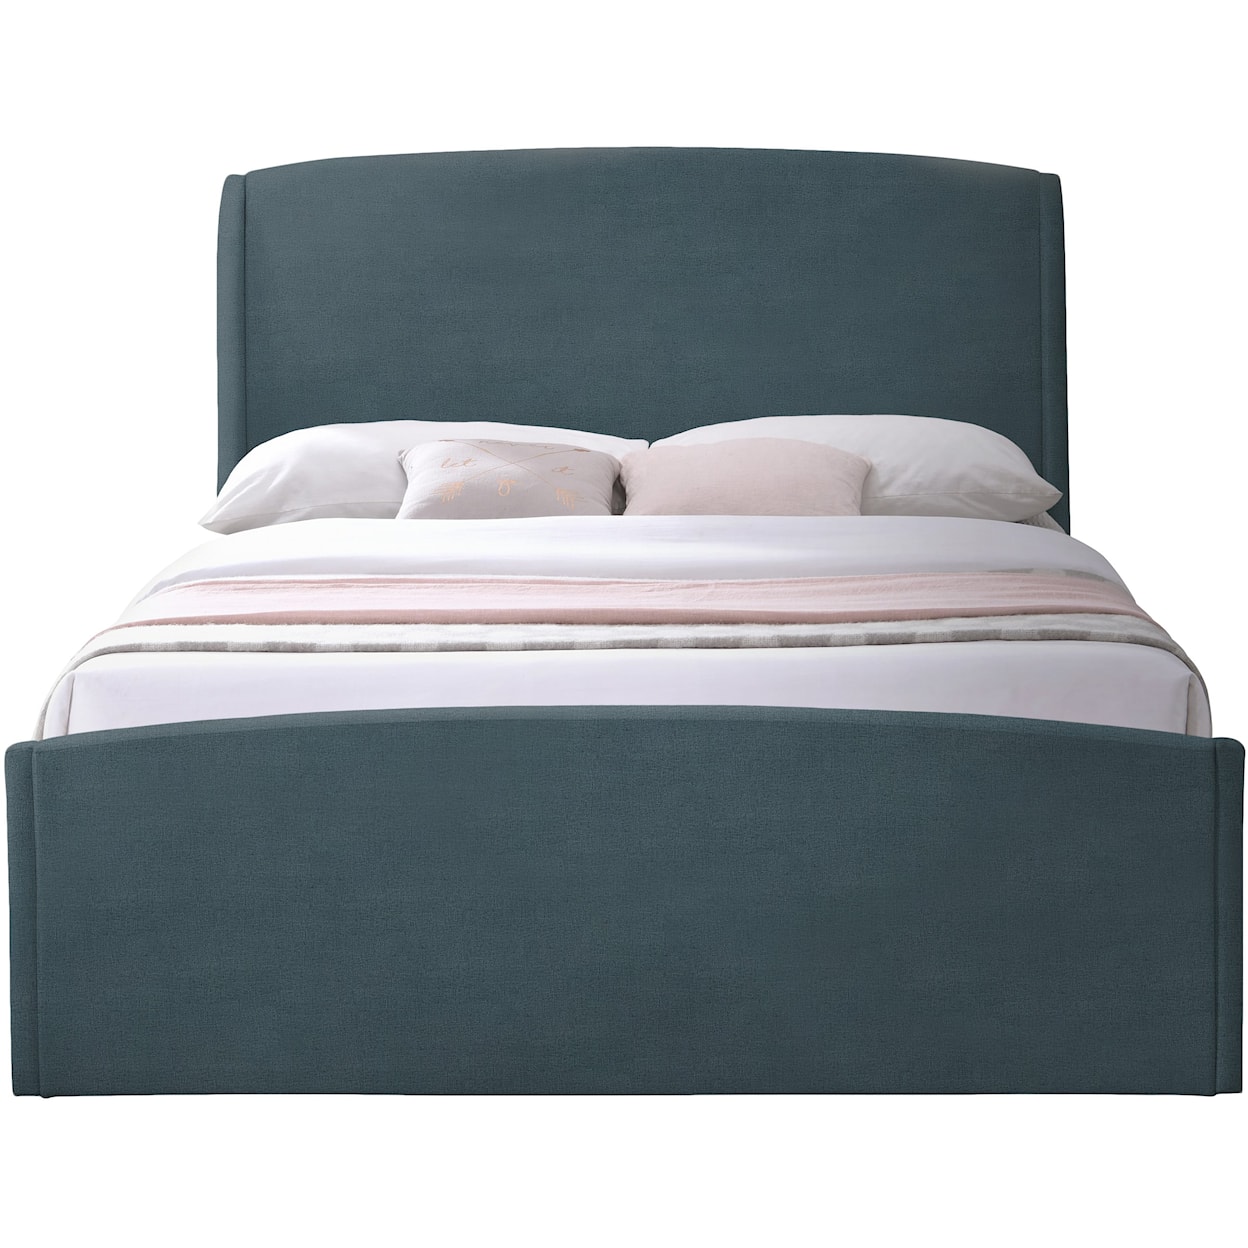 Meridian Furniture Tess Queen Bed (3 Boxes)